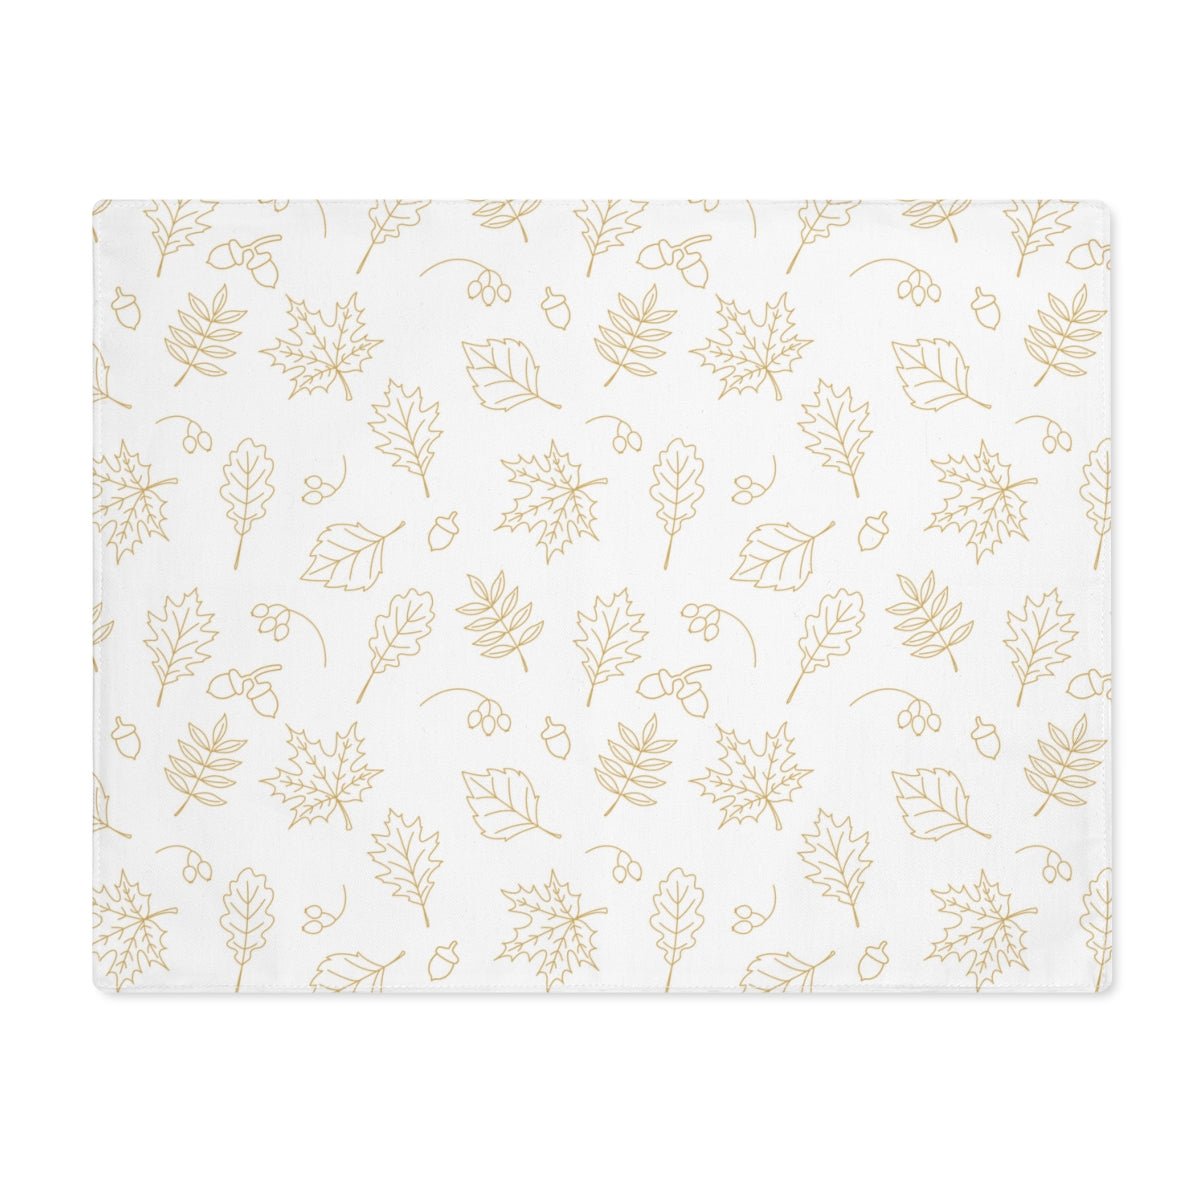 Acorns and Leaves Cotton Placemat - Puffin Lime